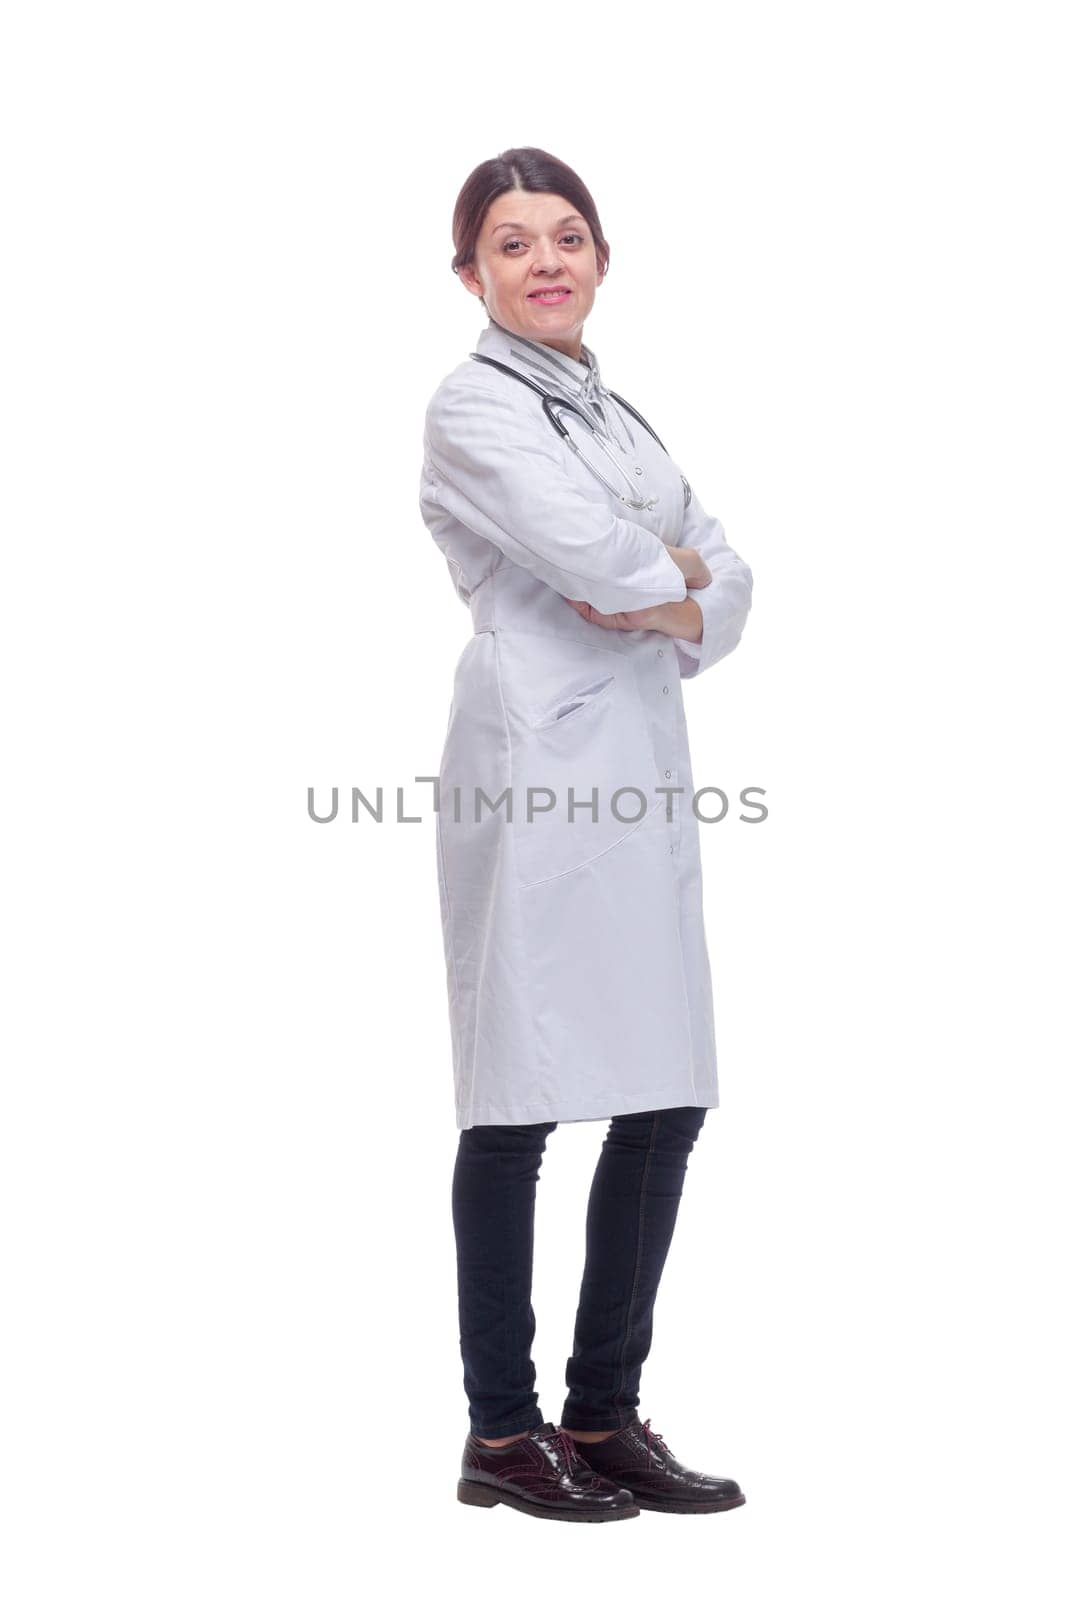 Female doctor full body side view on white background by asdf